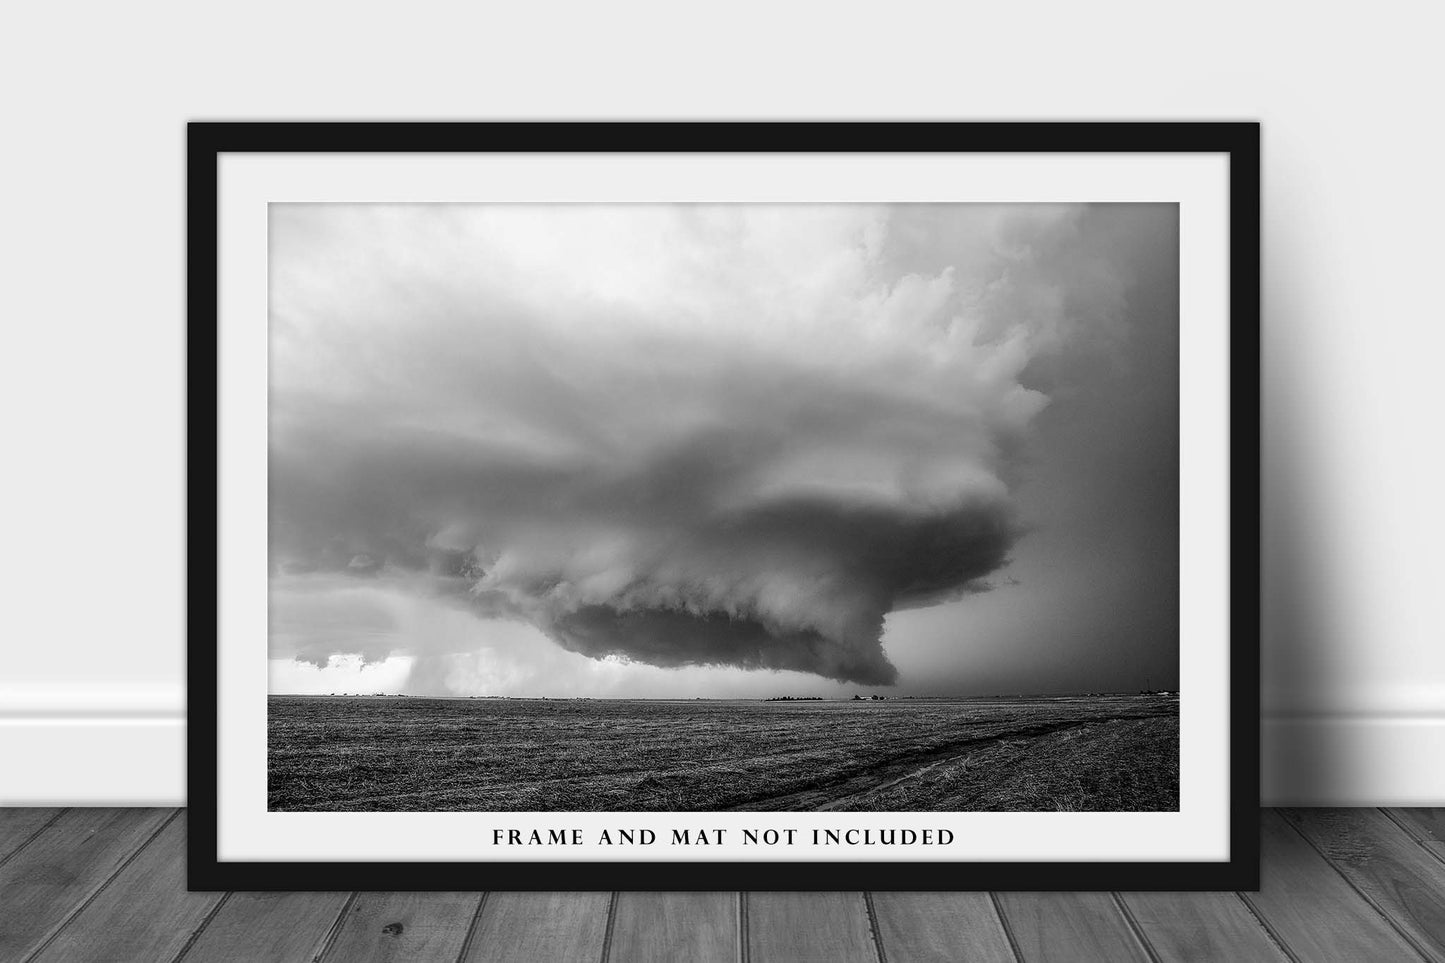 Storm Photography Print - Picture of Incredible Thunderstorm Over Field in Kansas in Black and White Weather Nature Wall Art Photo Decor